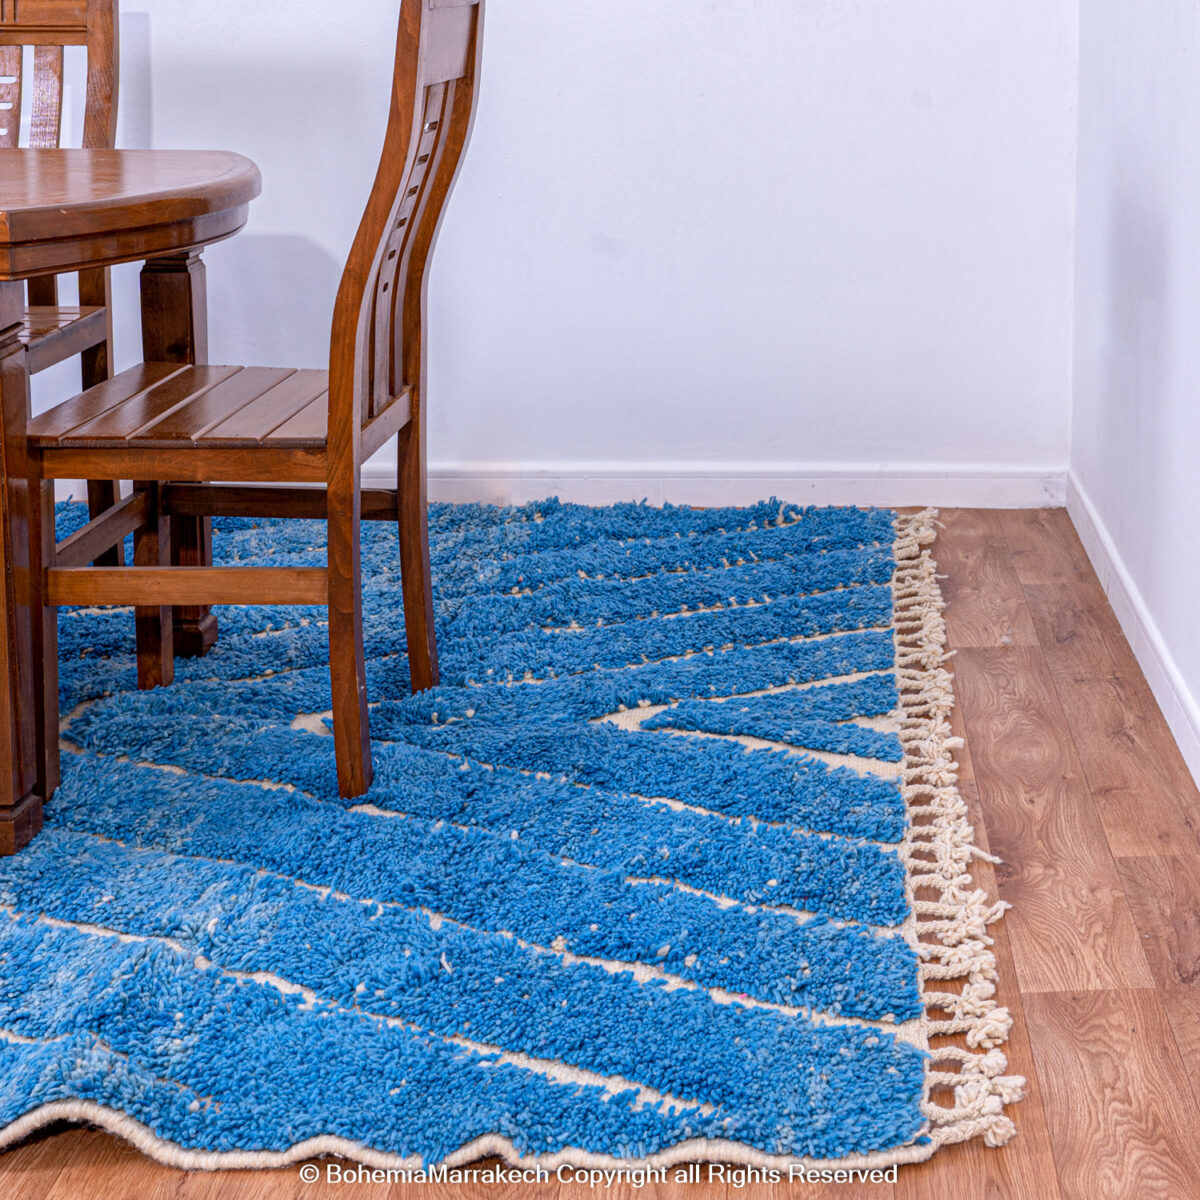 washable rugs ruggable rugs outdoor rugs washable area rugs kitchen rugs runner rugs machine washable rugs indoor outdoor rugs 8x10 area rugs living room rug washable runner rugs kids rugs kitchen runner kitchen runner rugs outdoor patio rugs boho rug 8x10 rugs rug sizes washable kitchen rugs ruggable reviews patio rugs washable rugs 8x10 best washable rugs machine washable area rugs playroom rug washable runner star wars rug best outdoor rugs ruggable outdoor rugs pet friendly rugs outdoor area rugs ruggable runner ruggable washable rugs cream rugs outdoor rugs for deck washable carpet large area rugs for living room rugs usa washable ruggable sale standard rug sizes washable outdoor rugs washable kitchen runners area rug sizes bohemian rugs best rugs for dogs washable area rugs 8x10 childrens rugs washable shag rug round washable rugs ruggable doormat kitchen rugs and runners ruggable bath mat rug size for living room ruggable area rugs washable entryway rugs best kitchen rugs washable throw rugs kitchen area rugs dog rugs disney rugs 9x12 washable rug dog friendly rugs washable rugs 9x12 washable rugs for living room room size rugs pet rug large washable rugs ruggable rugs on sale rug size guide pet friendly area rugs rug size calculator outdoor rugs for porch area rug for living room kitchen runner rugs washable rug sizes chart large living room rug ruggable usa ruggable chairs white washable rug washable area rugs 9x12 ruggable round rug washable ruggable 3x5 washable rug machine washable runner rugs pet proof rugs washable ruggable rugs rug size for dining table porch rugs common rug sizes washable rugs like ruggable ruggable kitchen rugs washable area rugs 5x7 runner washable rugs dining room rug size ruggable kitchen runner washable nursery rug washable floor rugs outdoor ruggable ruggable 8x10 best kitchen runners